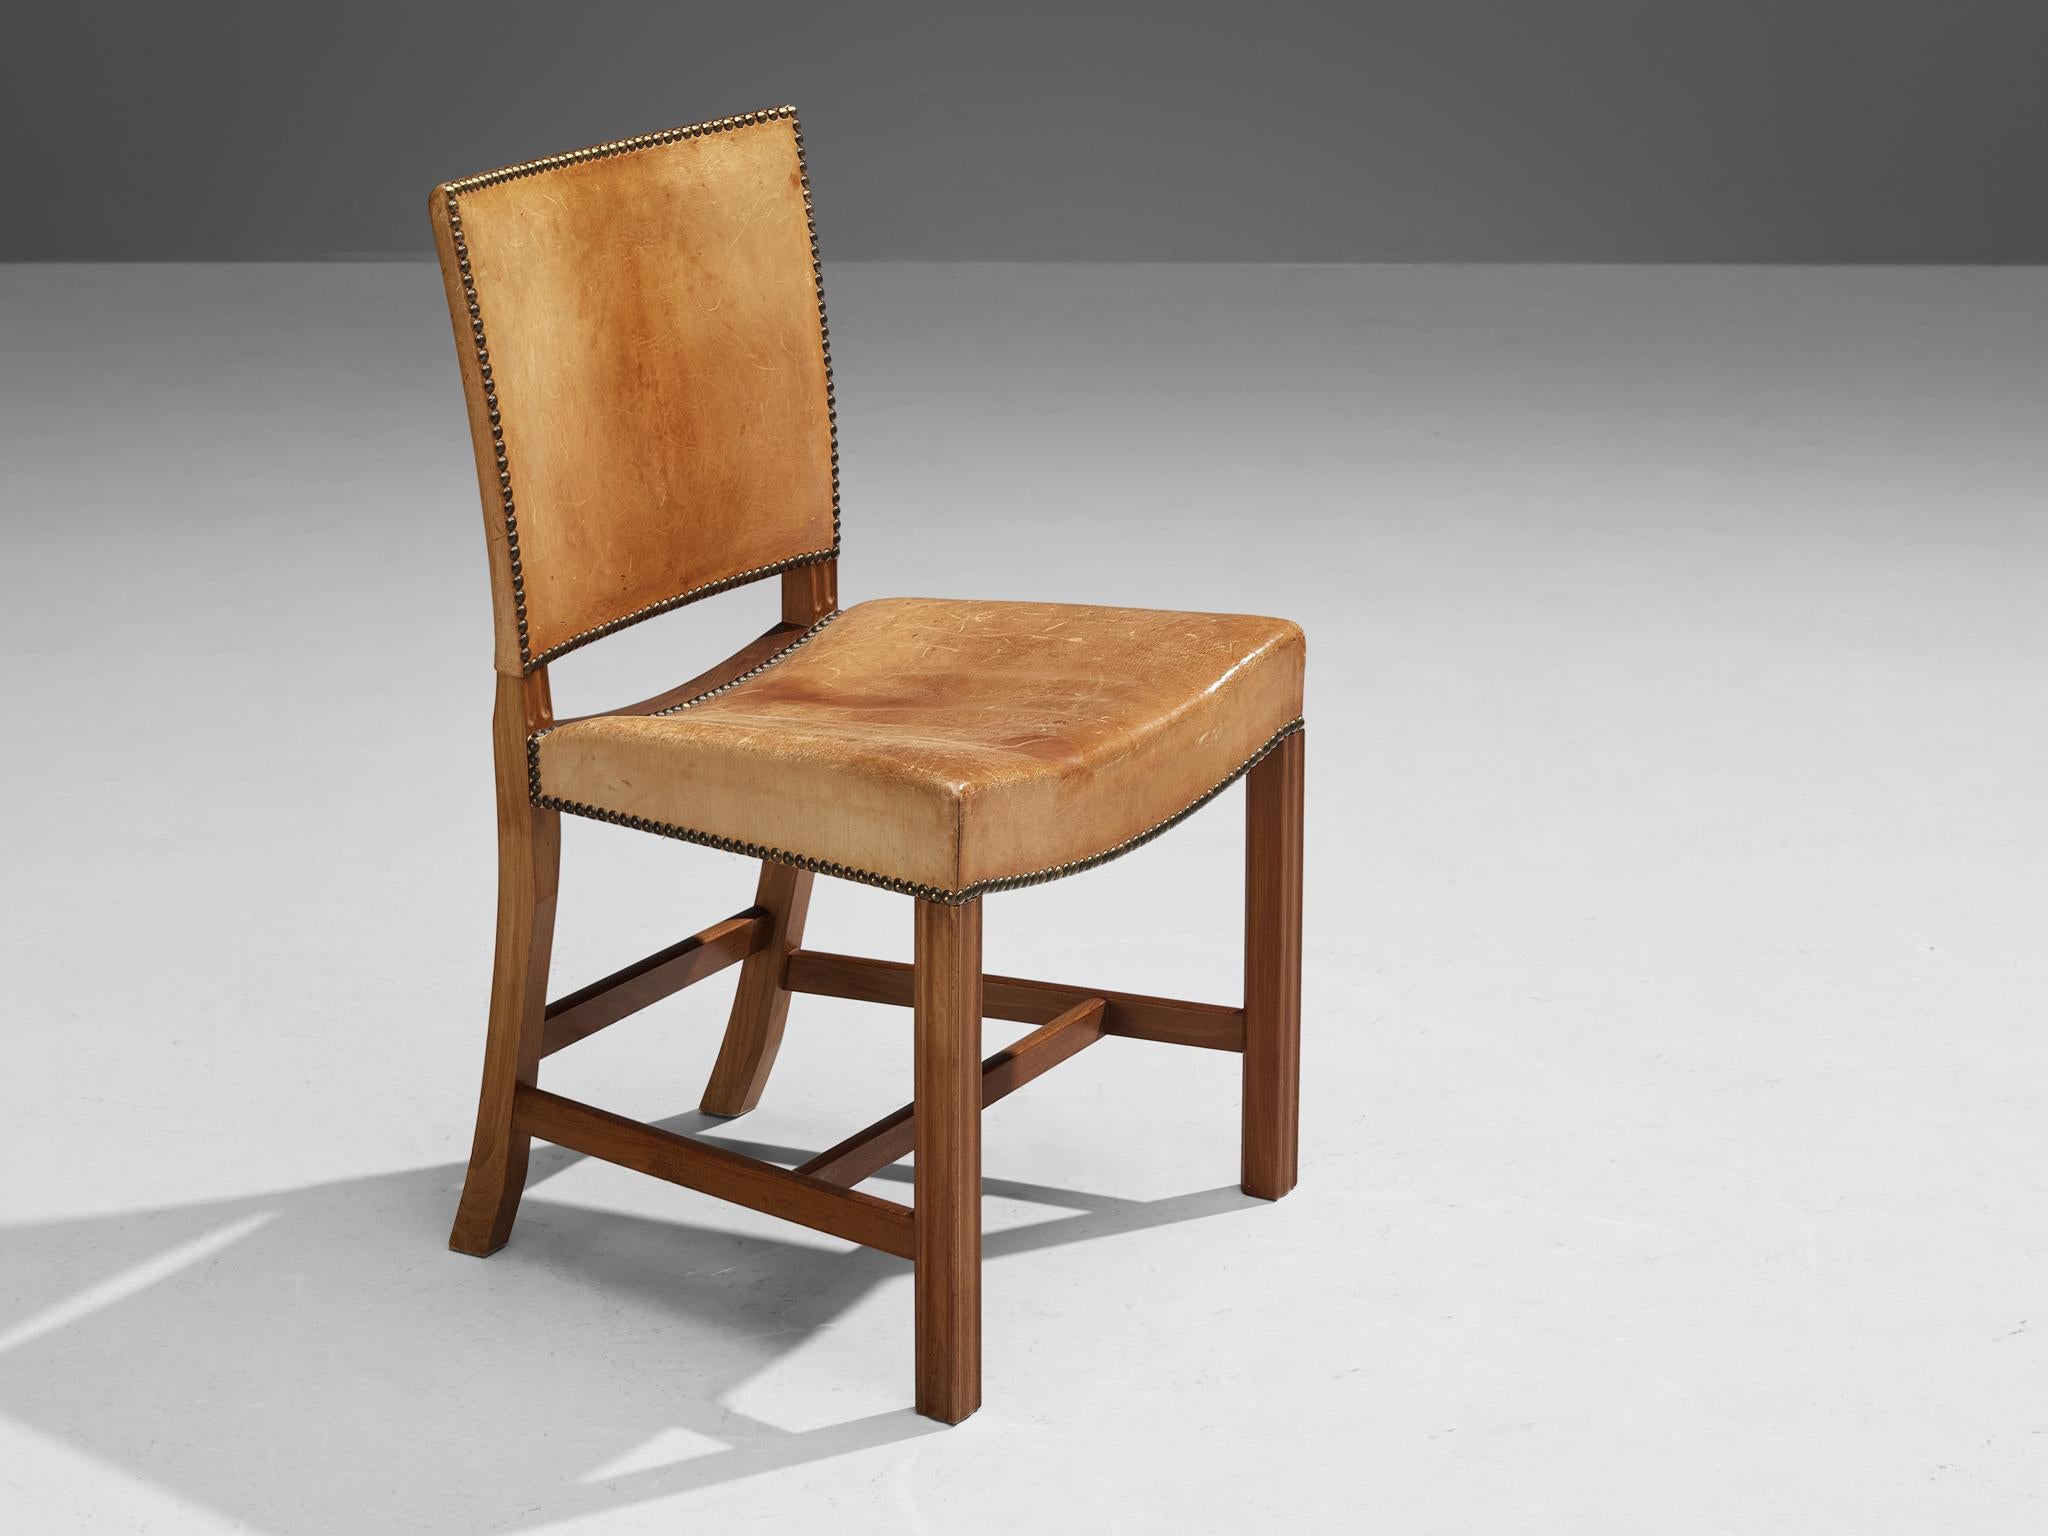 Mid-20th Century Kaare Klint for Rud Rasmussen Set of Four 'Red Chairs' in Original Leather